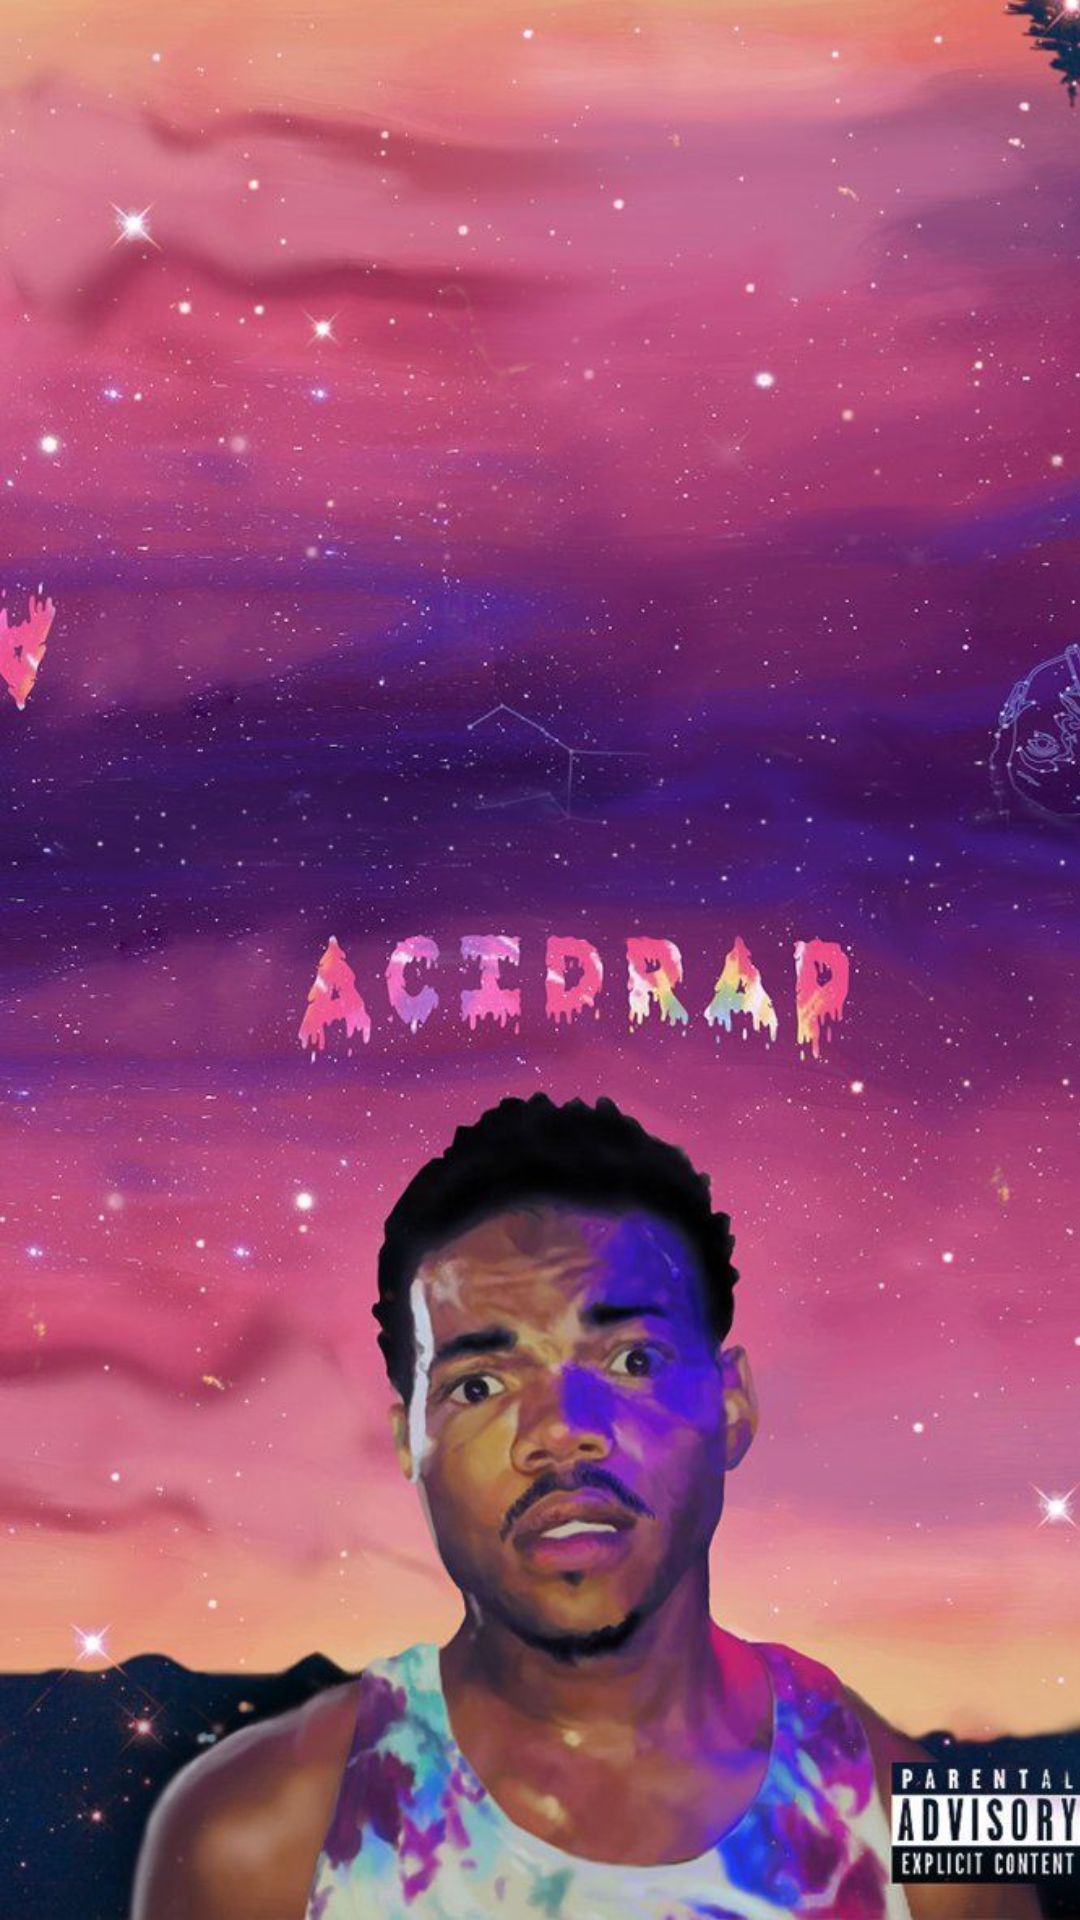 Chance the Rapper Acid Rap iPhone Wallpaper with high-resolution 1080x1920 pixel. You can use this wallpaper for your iPhone 5, 6, 7, 8, X, XS, XR backgrounds, Mobile Screensaver, or iPad Lock Screen - Chance the Rapper